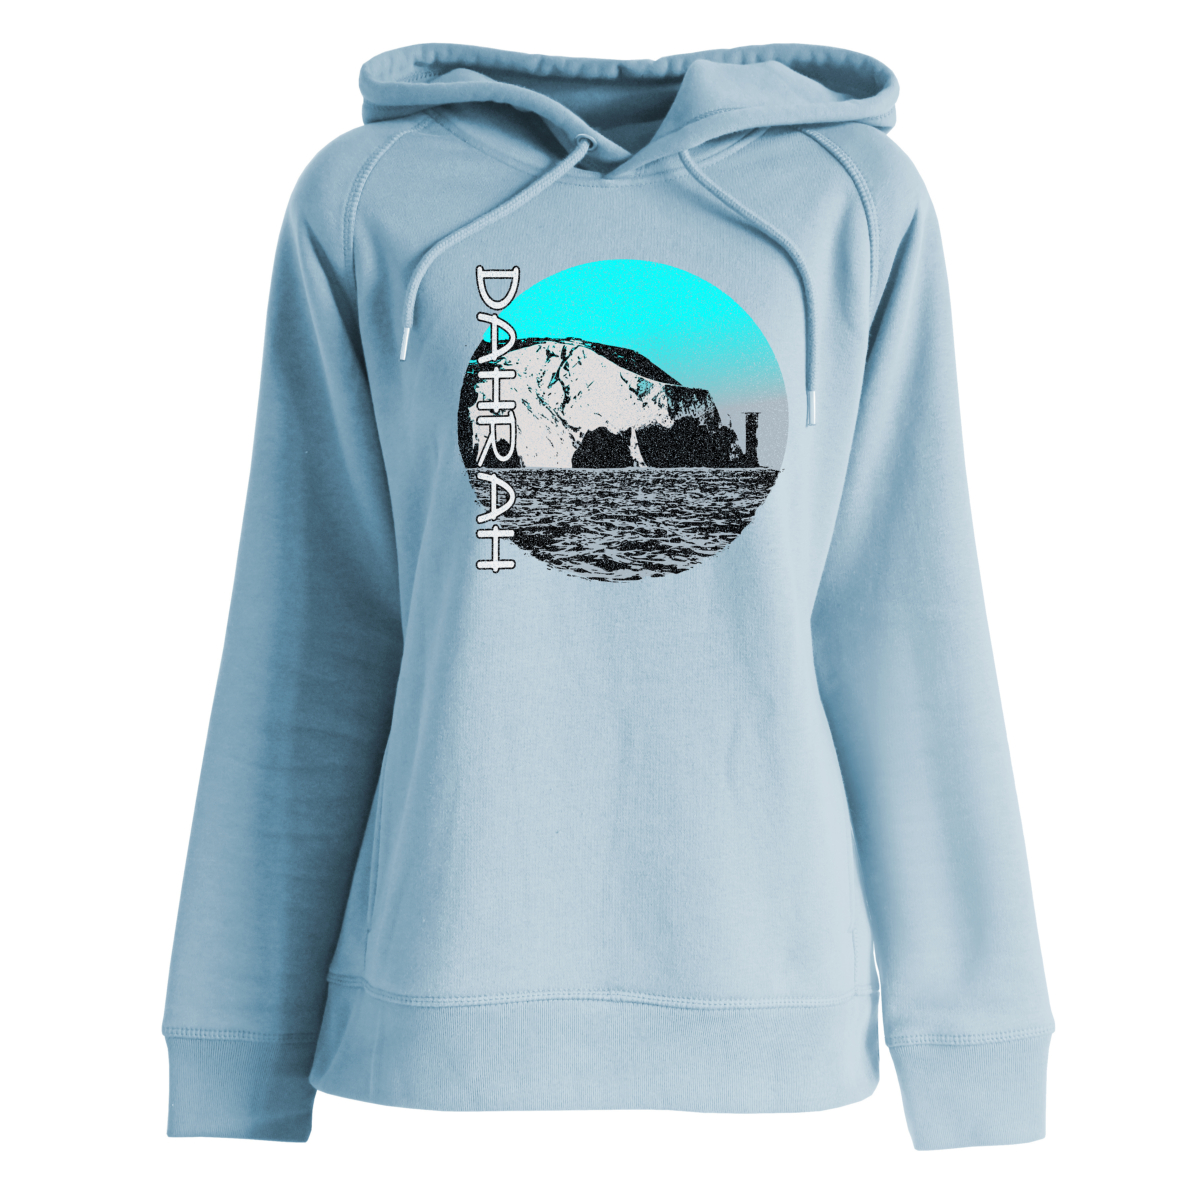 Dahrah Fashion unisex hoodie with print of the scenic coastline of the Isle of Wight